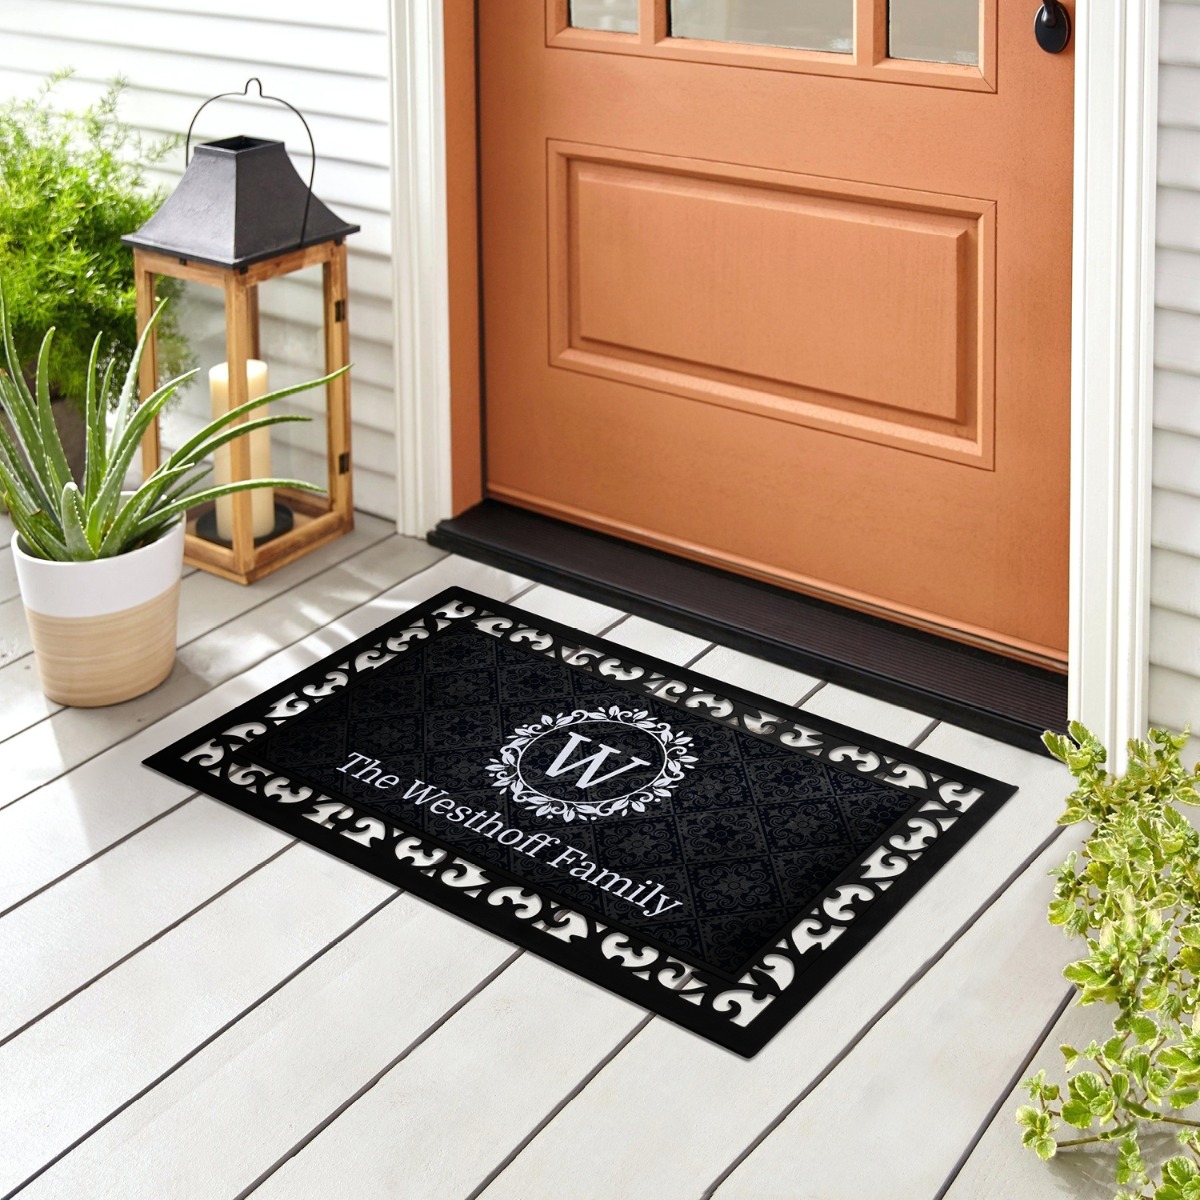 Flourish Initial Personalized Narrow Doormat with Frame